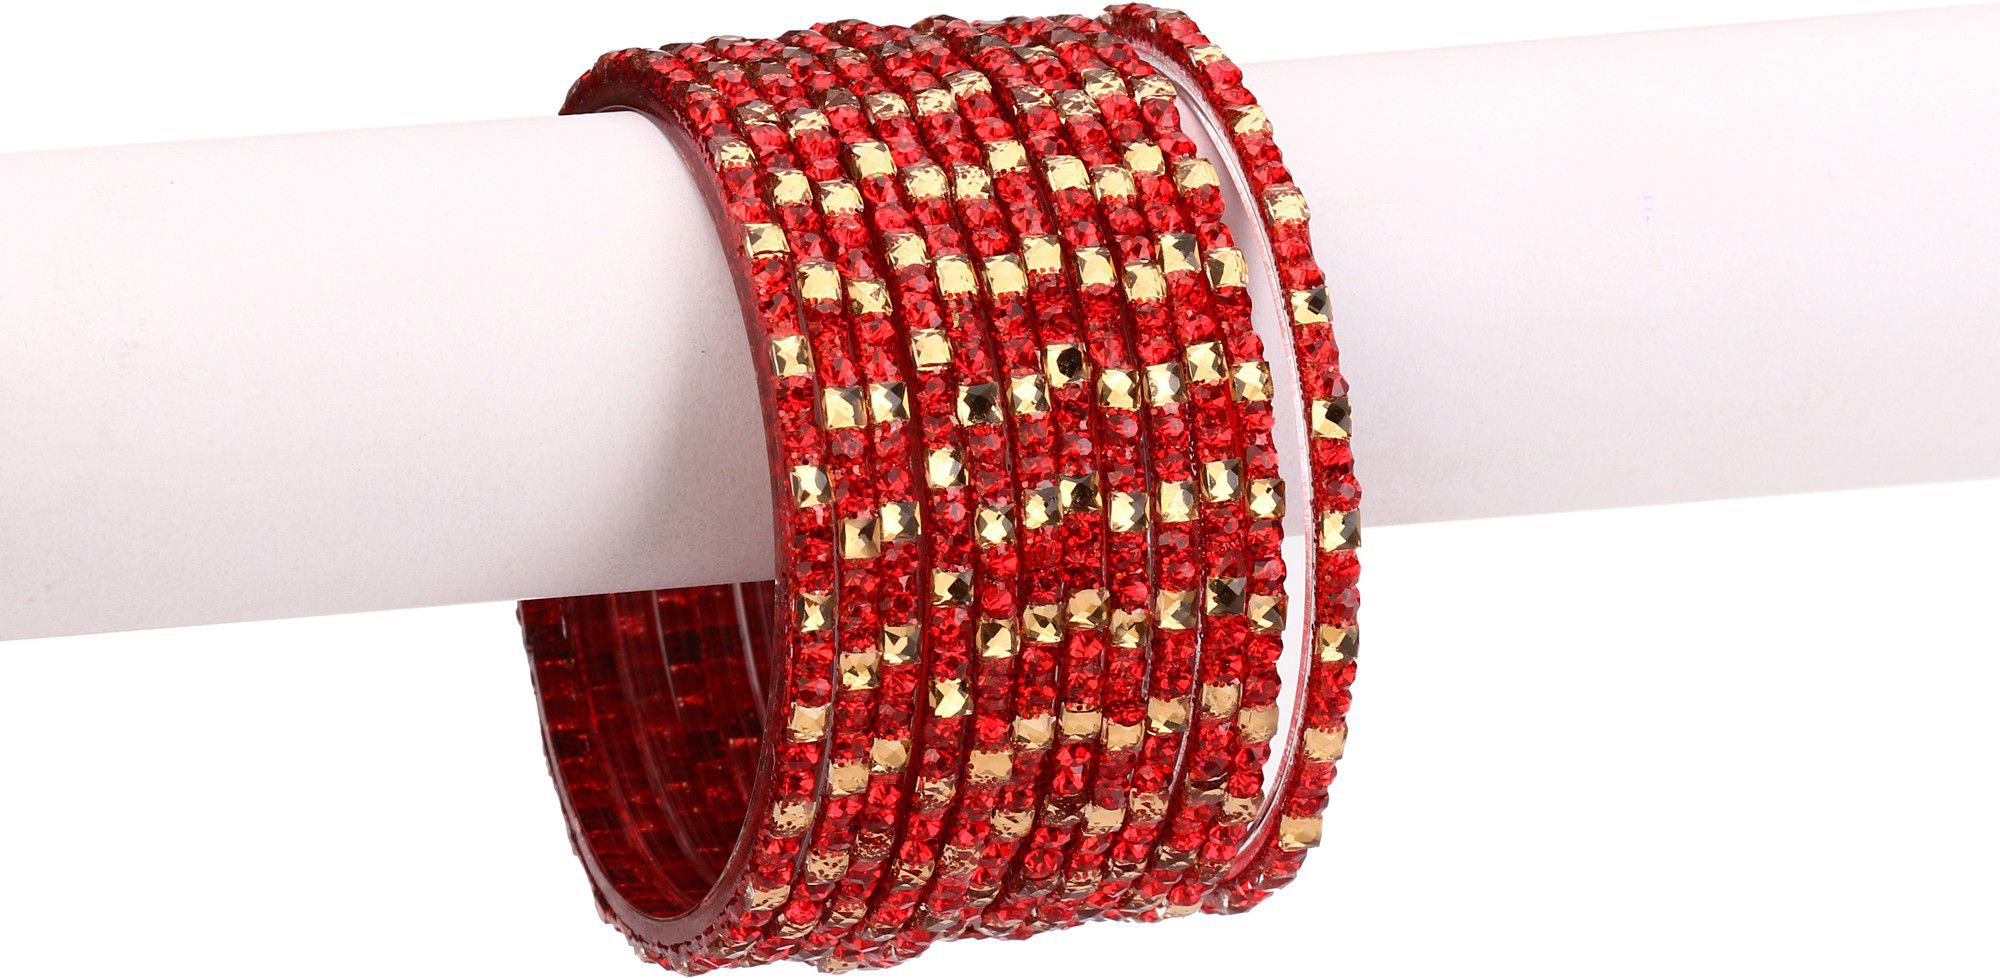     			Somil 12 Firing Red Glass Bangle Party Set Fully Ornamented With Colorful Beads & Crystal With Safety Box-EI_2.2